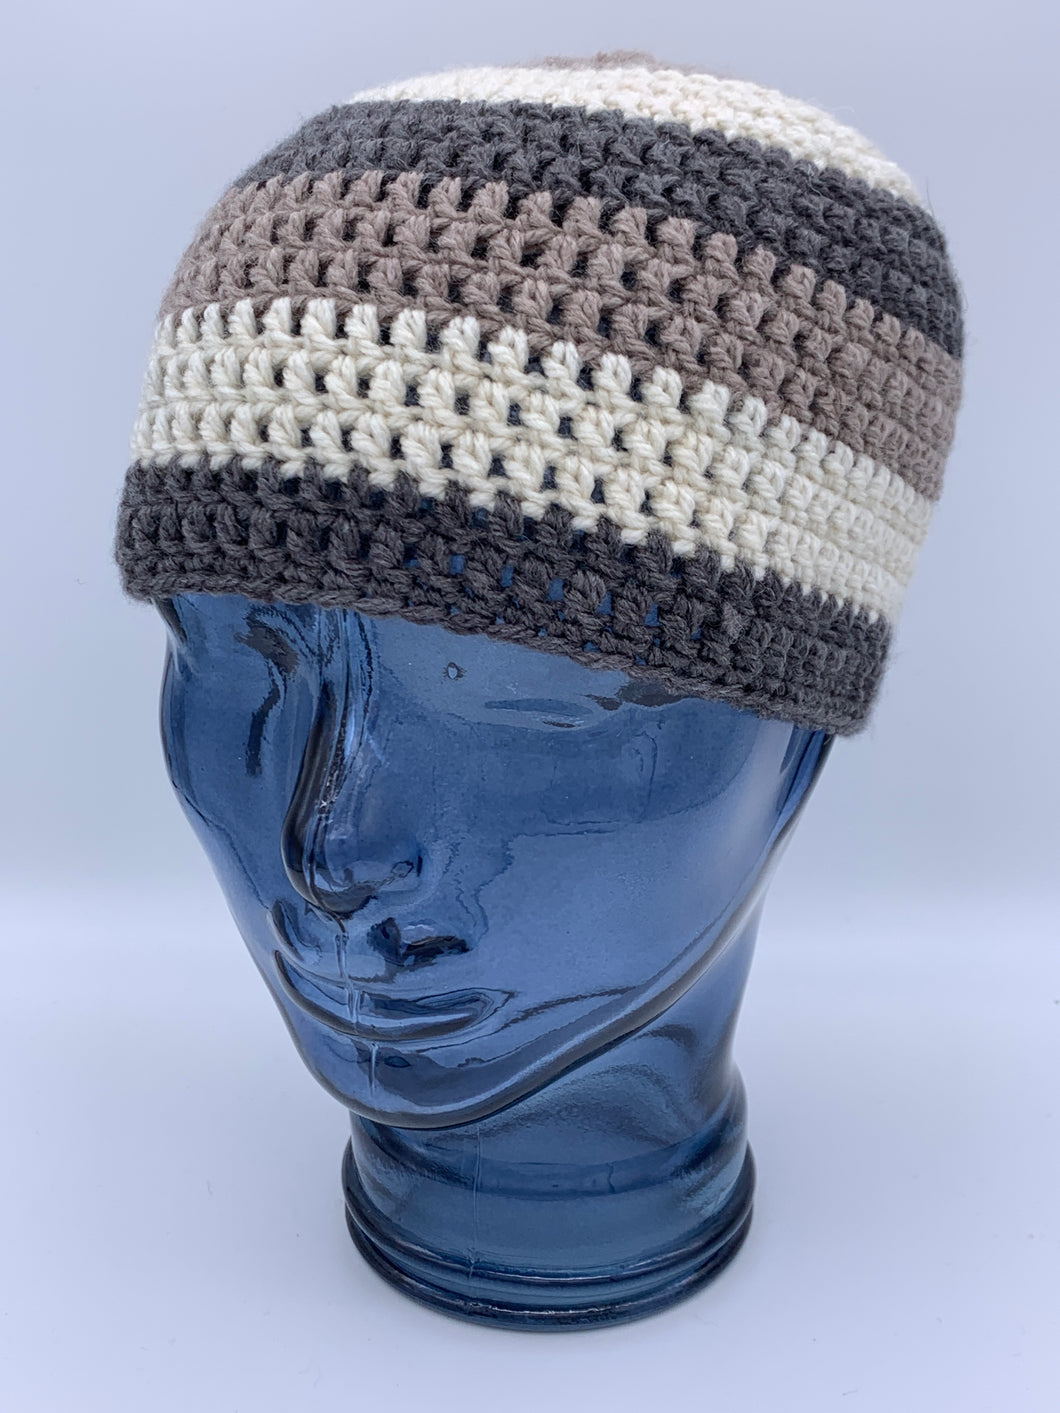 Crochet striped brown and cream beanie hat- Size Teen/Small adult